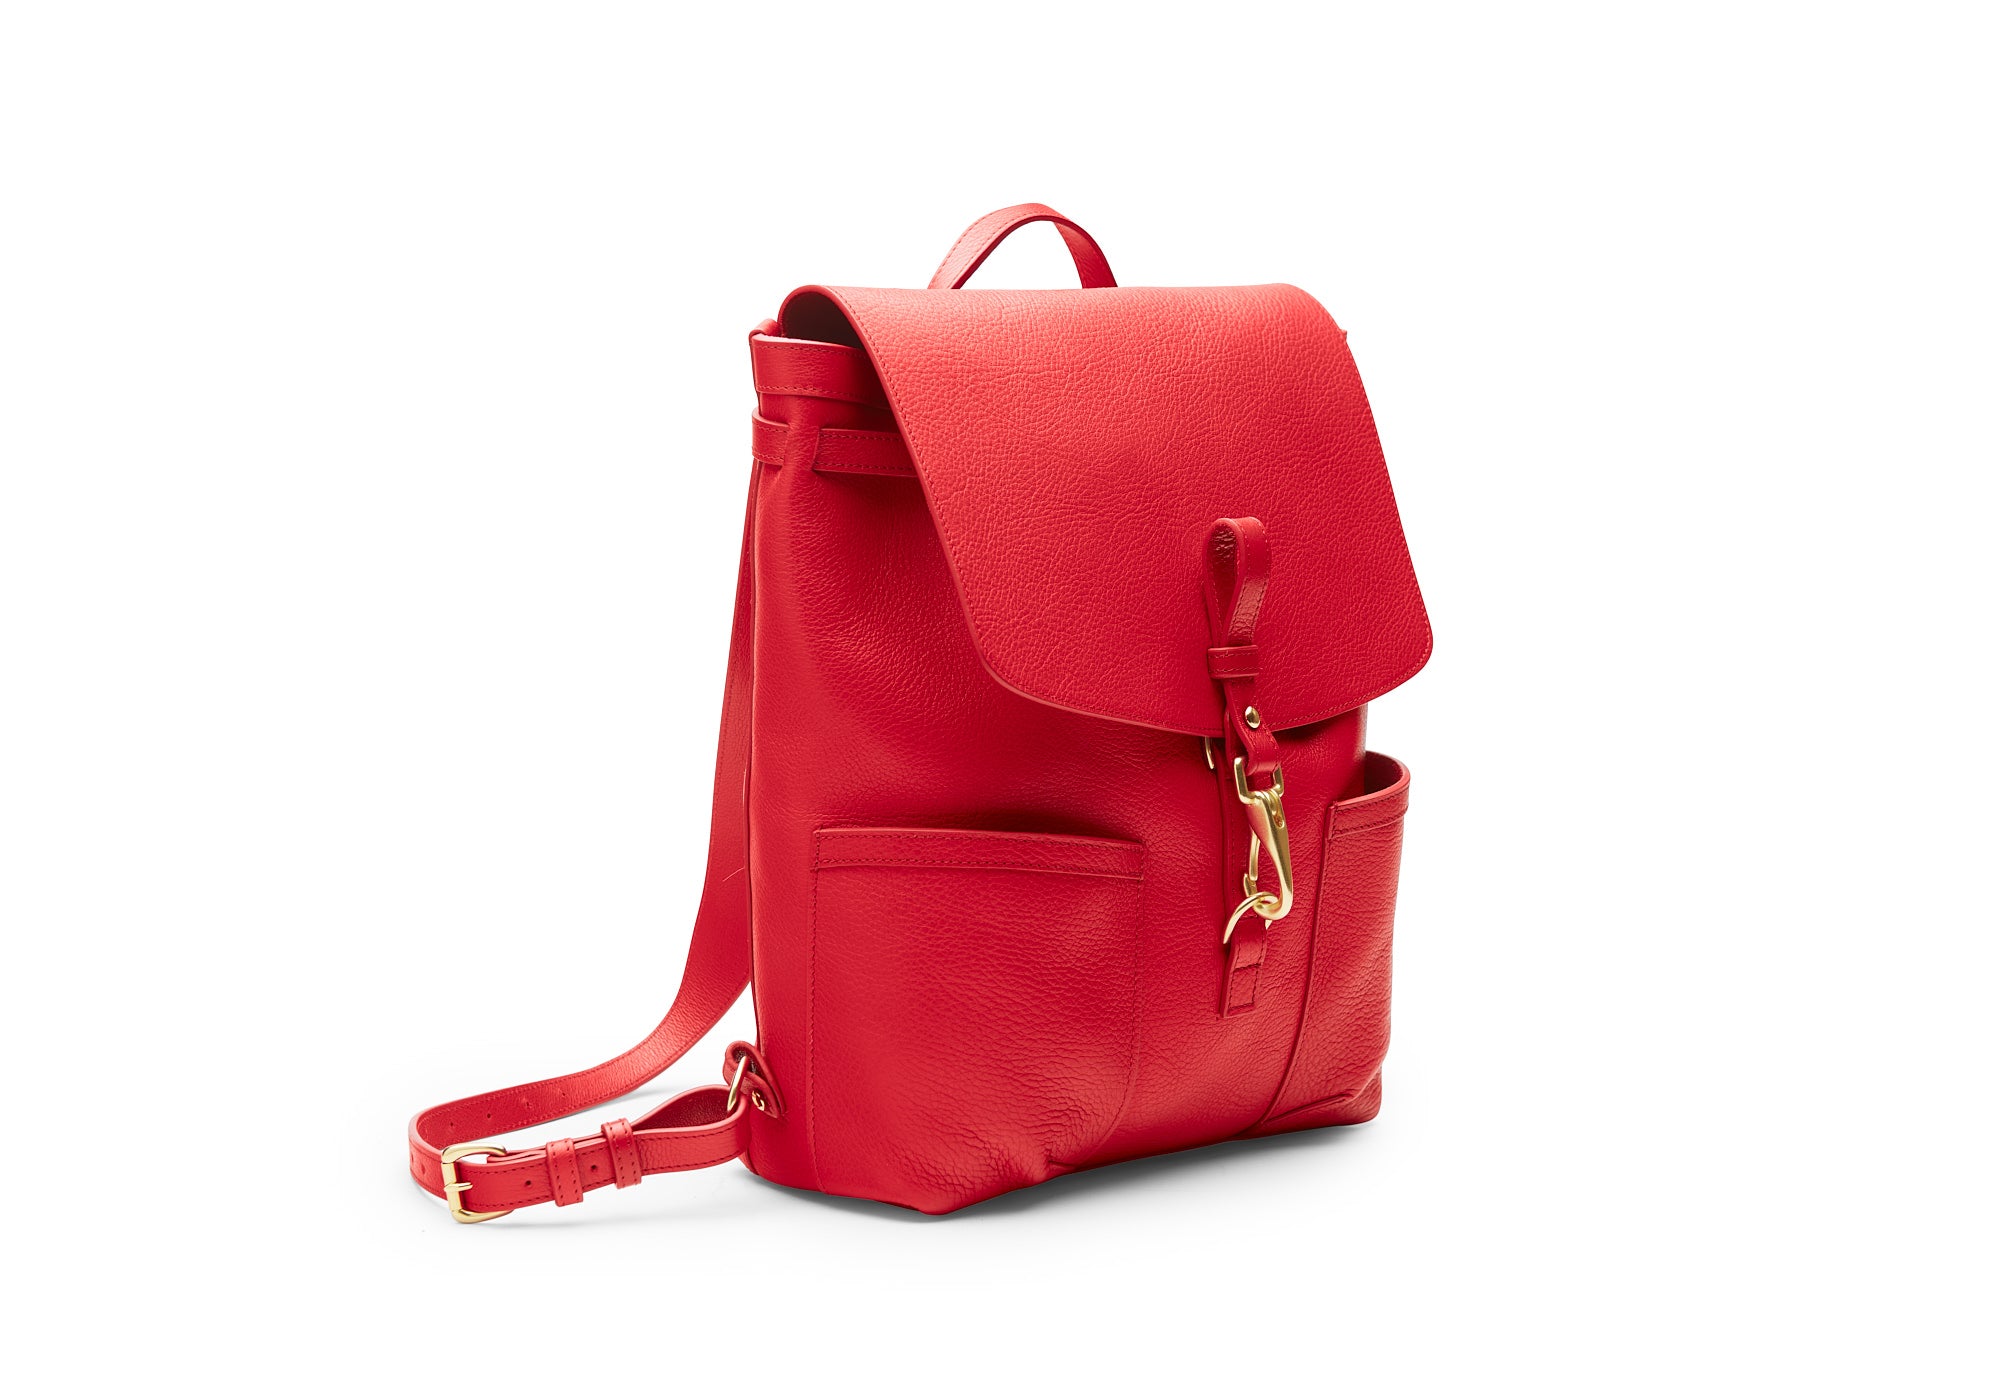 Full View of Leather No. 5 Knapsack Pop Red